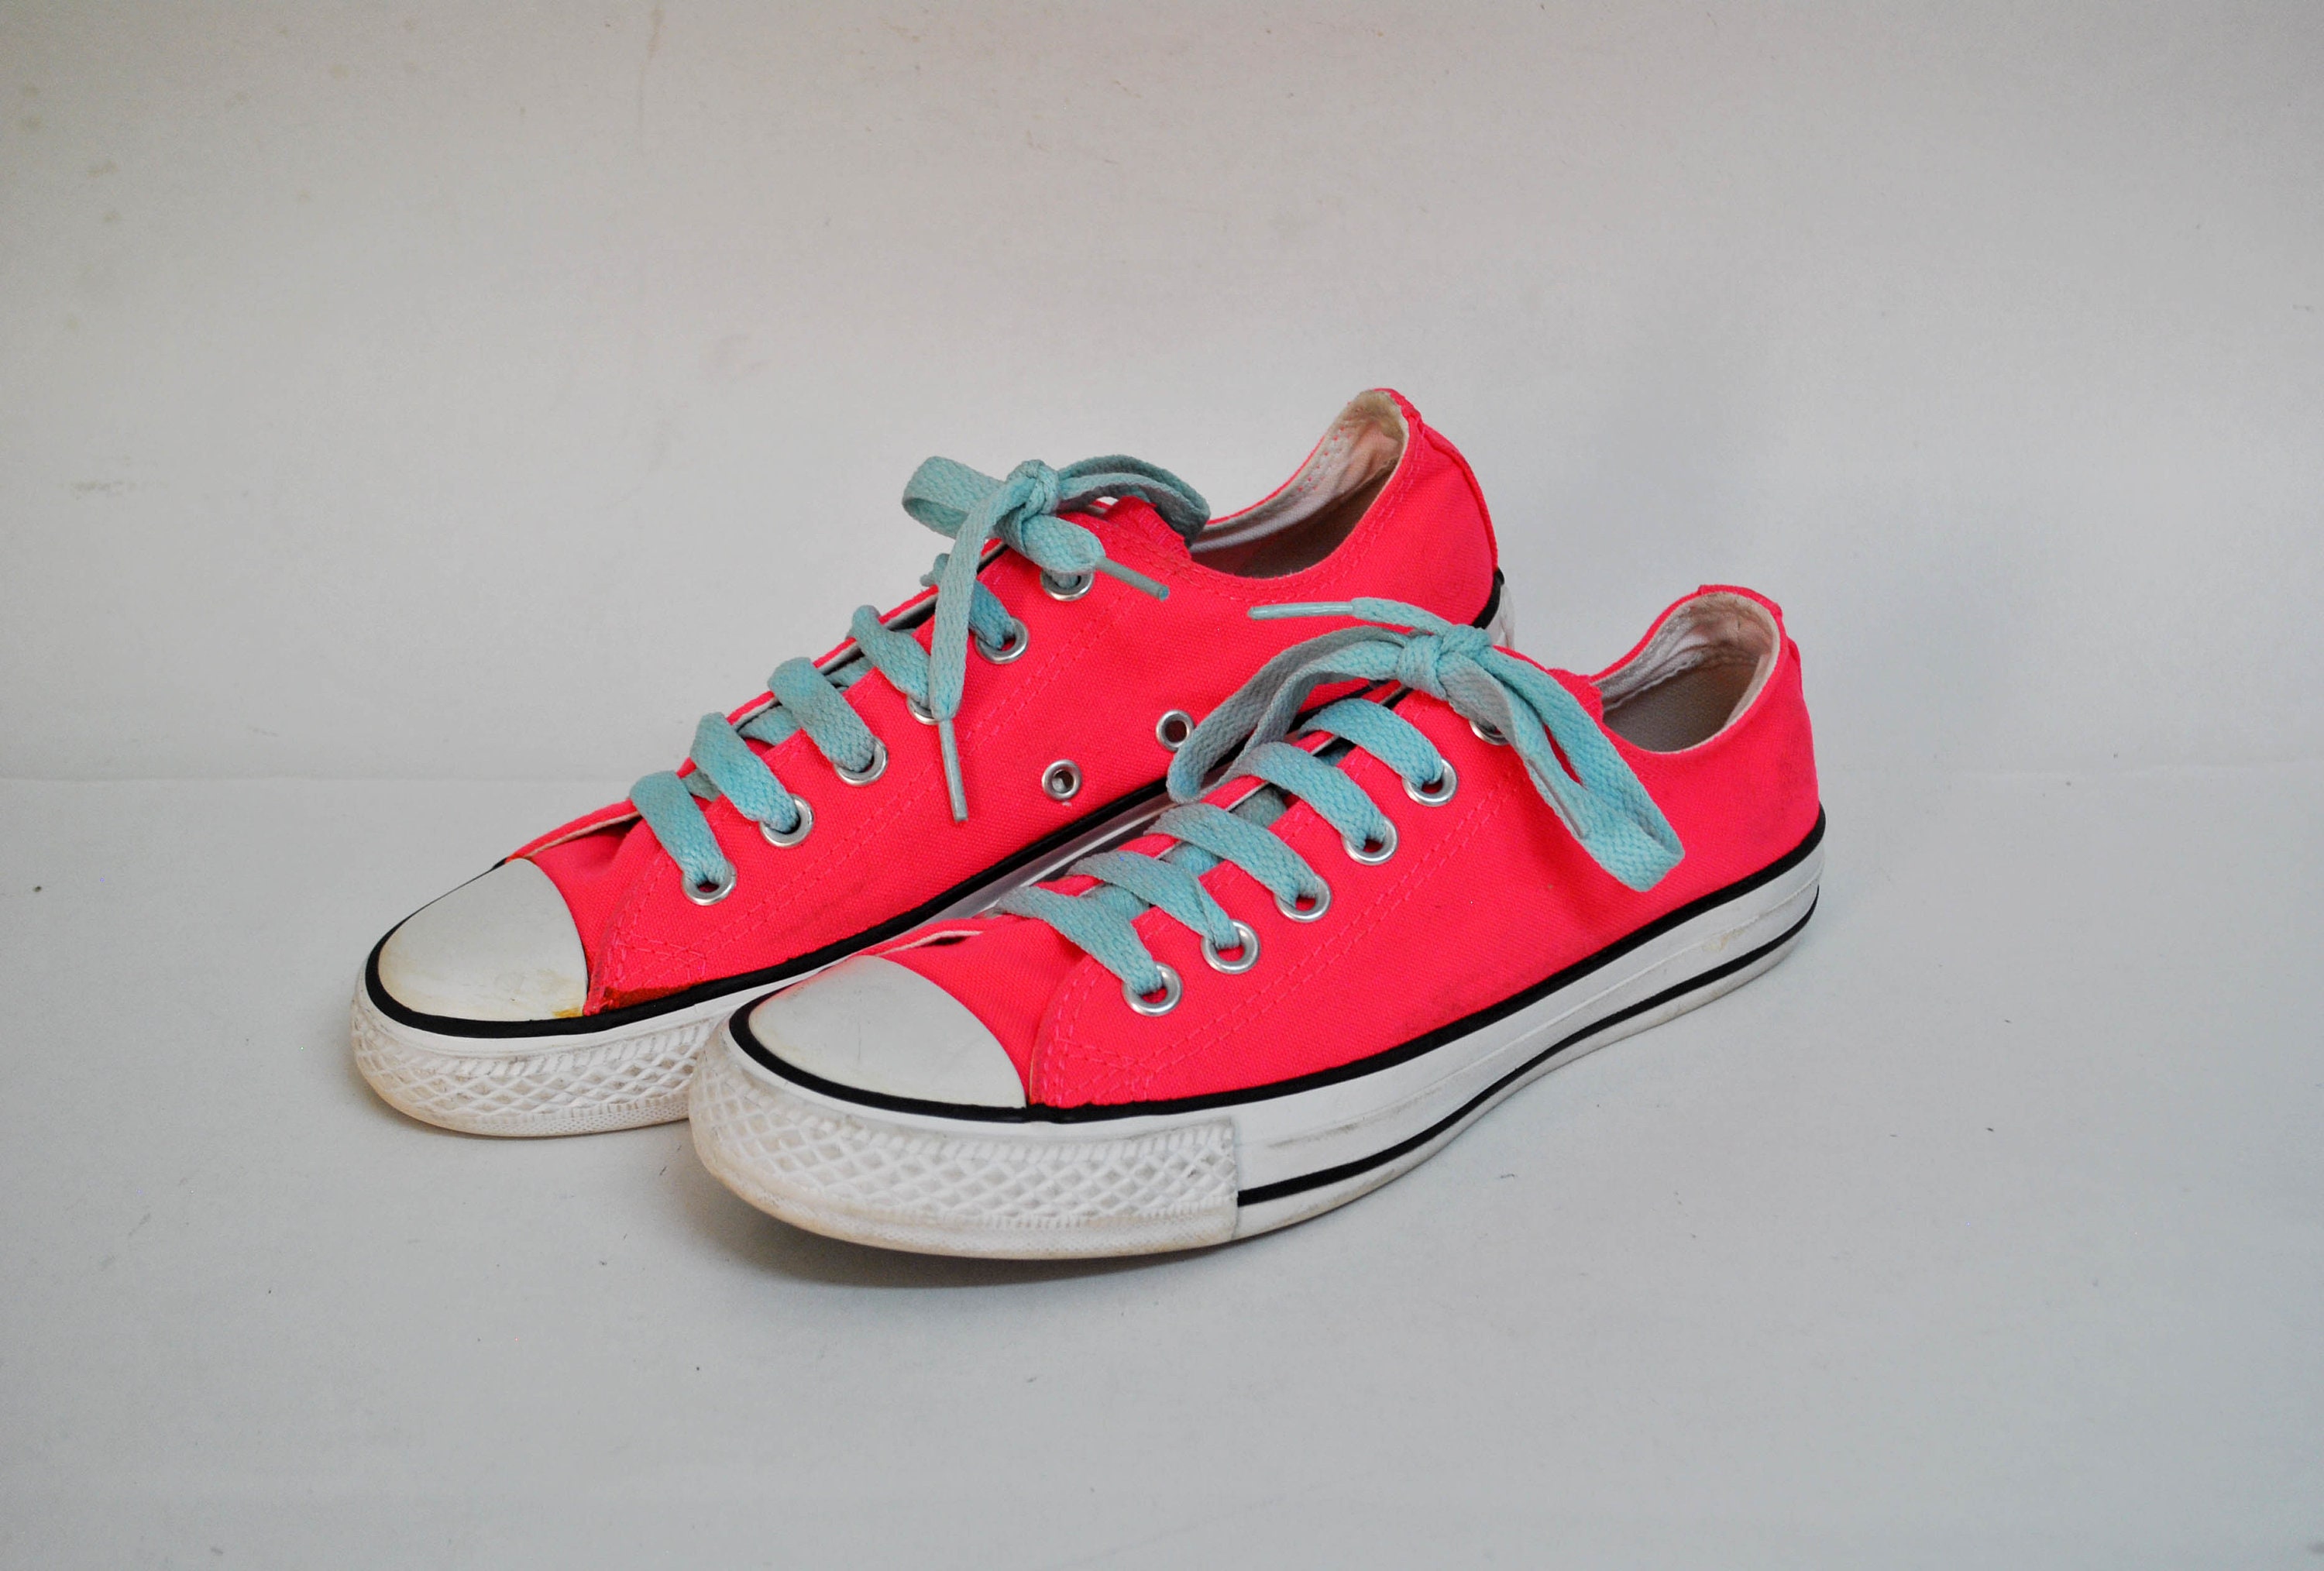 Star Shoes Canvas Pink Tie Sneakers Low Tops - Etsy Hong Kong